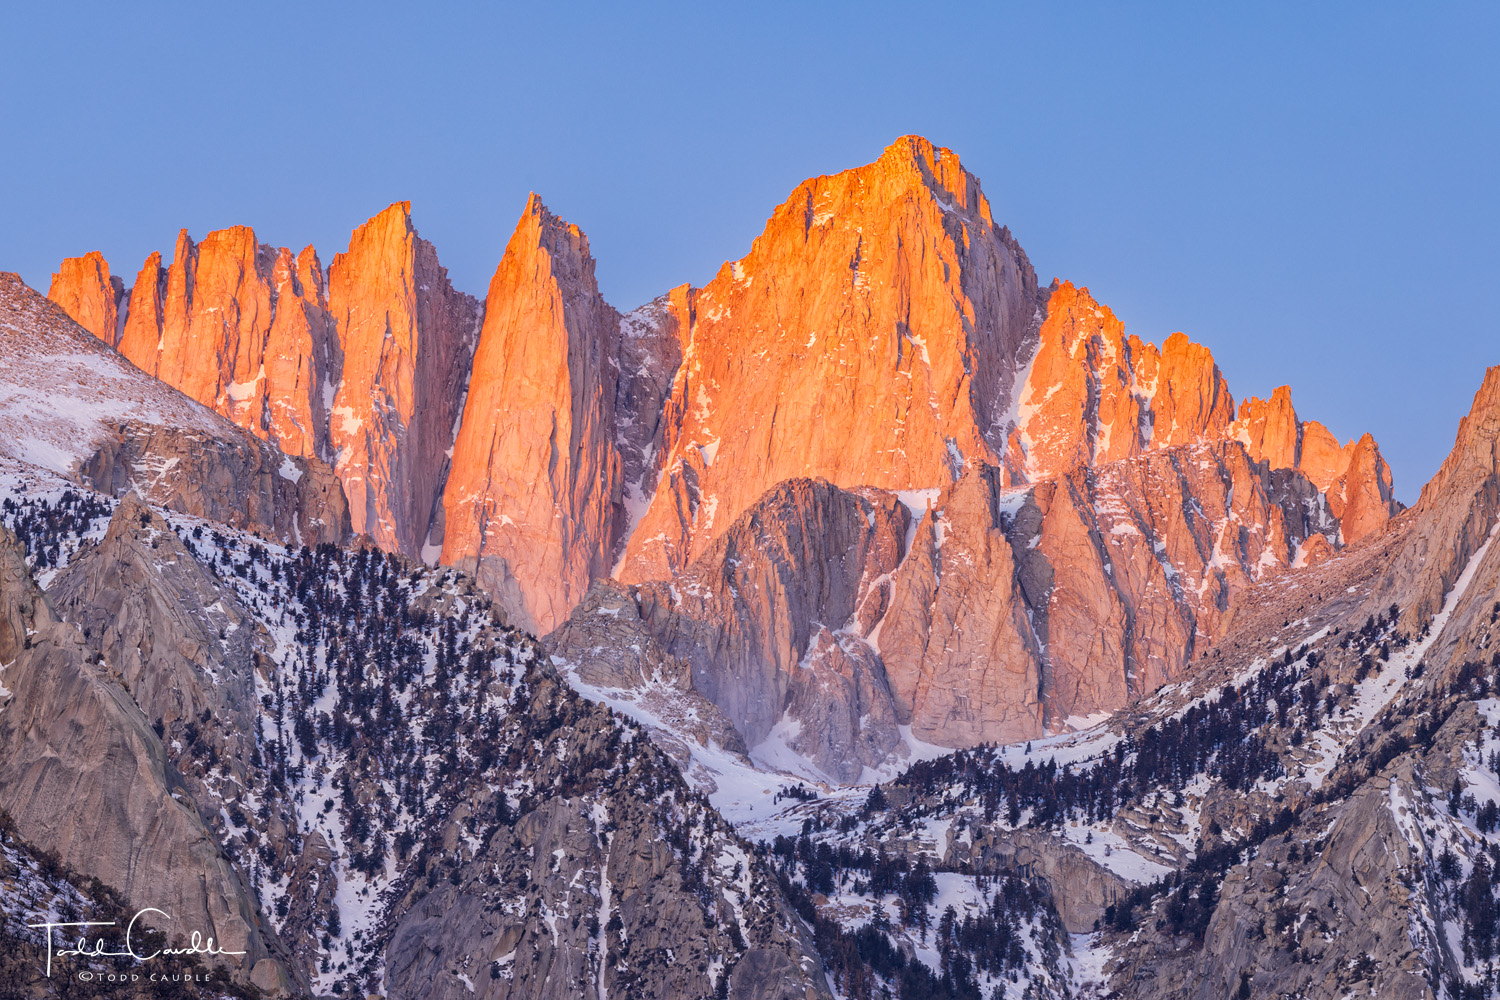 The first blush of sunrise light on Mount Whitney, at 14,505 feet in elevation, the highest peak in the contiguous 48 United...